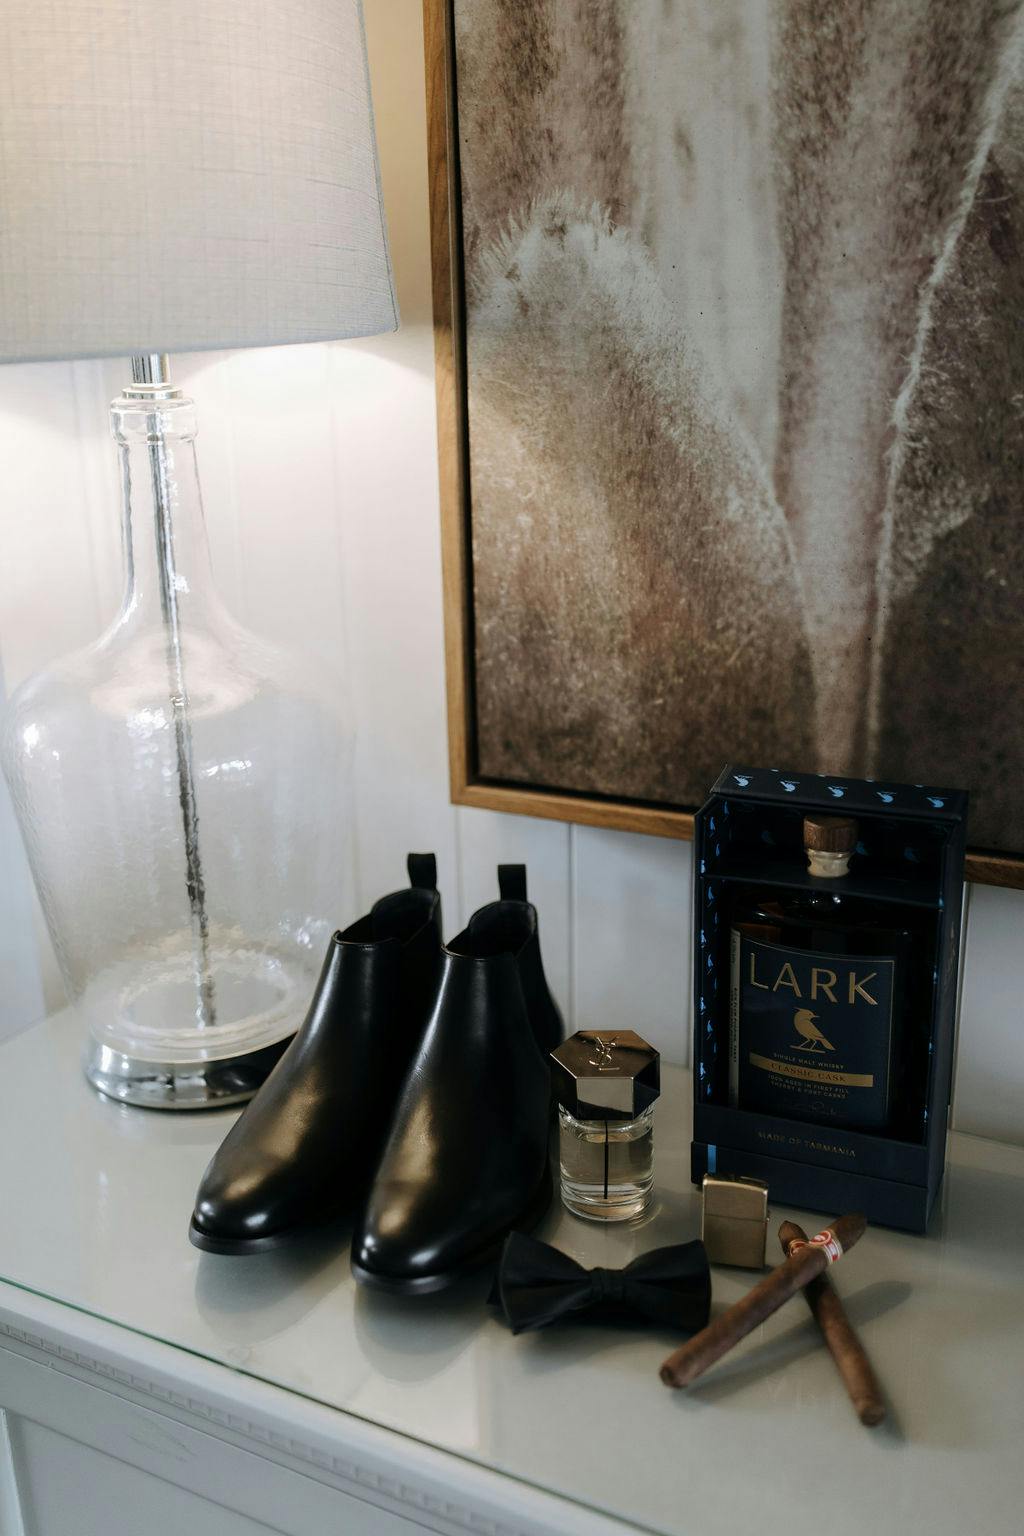 A neatly arranged dresser features black dress boots, a bow tie, gold cufflinks, cigars, a bottle of cologne, a boxed bottle of Lark whiskey, and a clear glass lamp with a white shade. A framed abstract art piece hangs above the dresser.